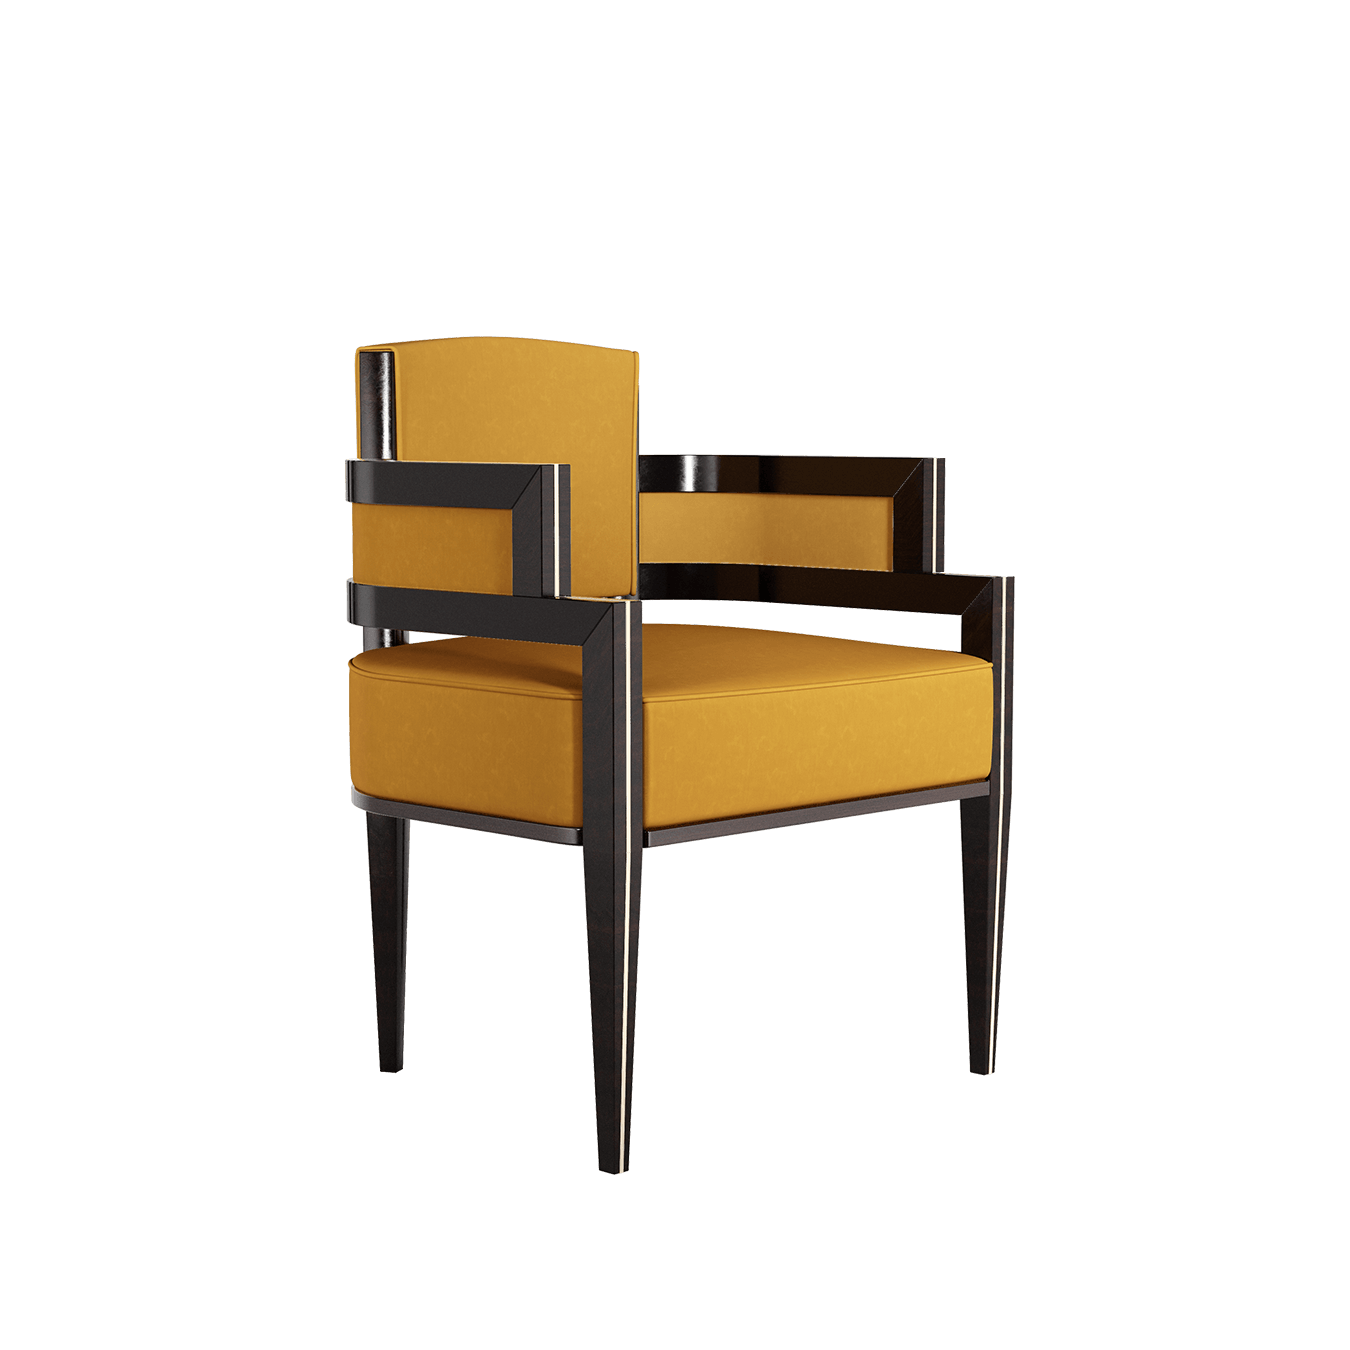 art deco style chair for contemporary dining room projects